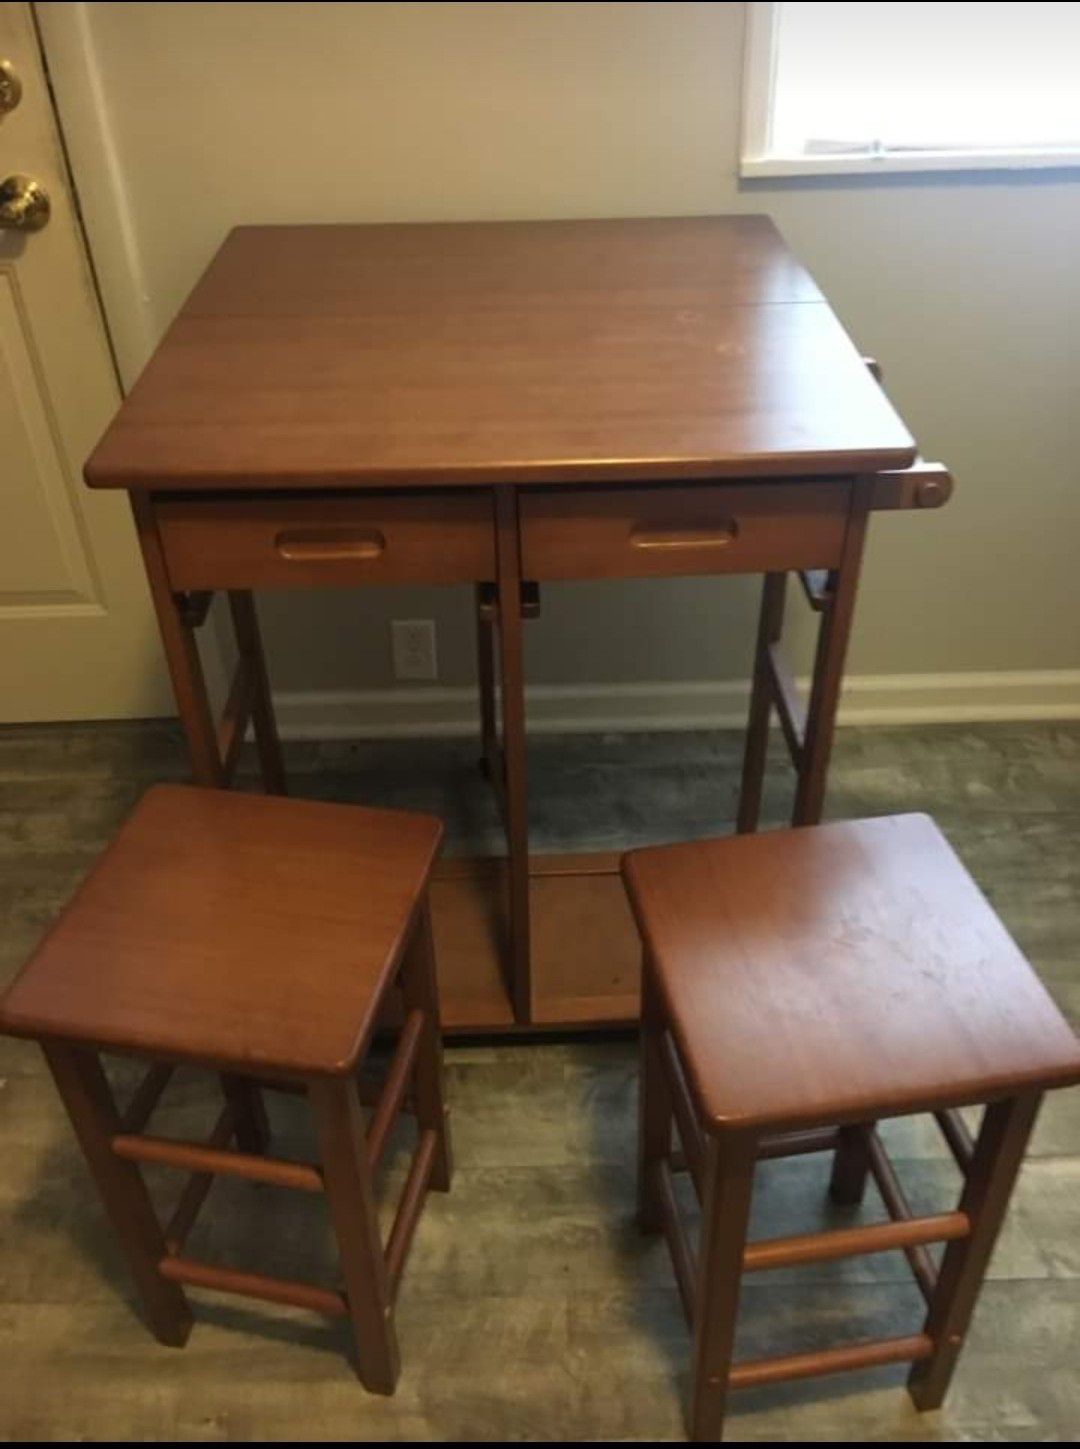 Folding table with 2 stools